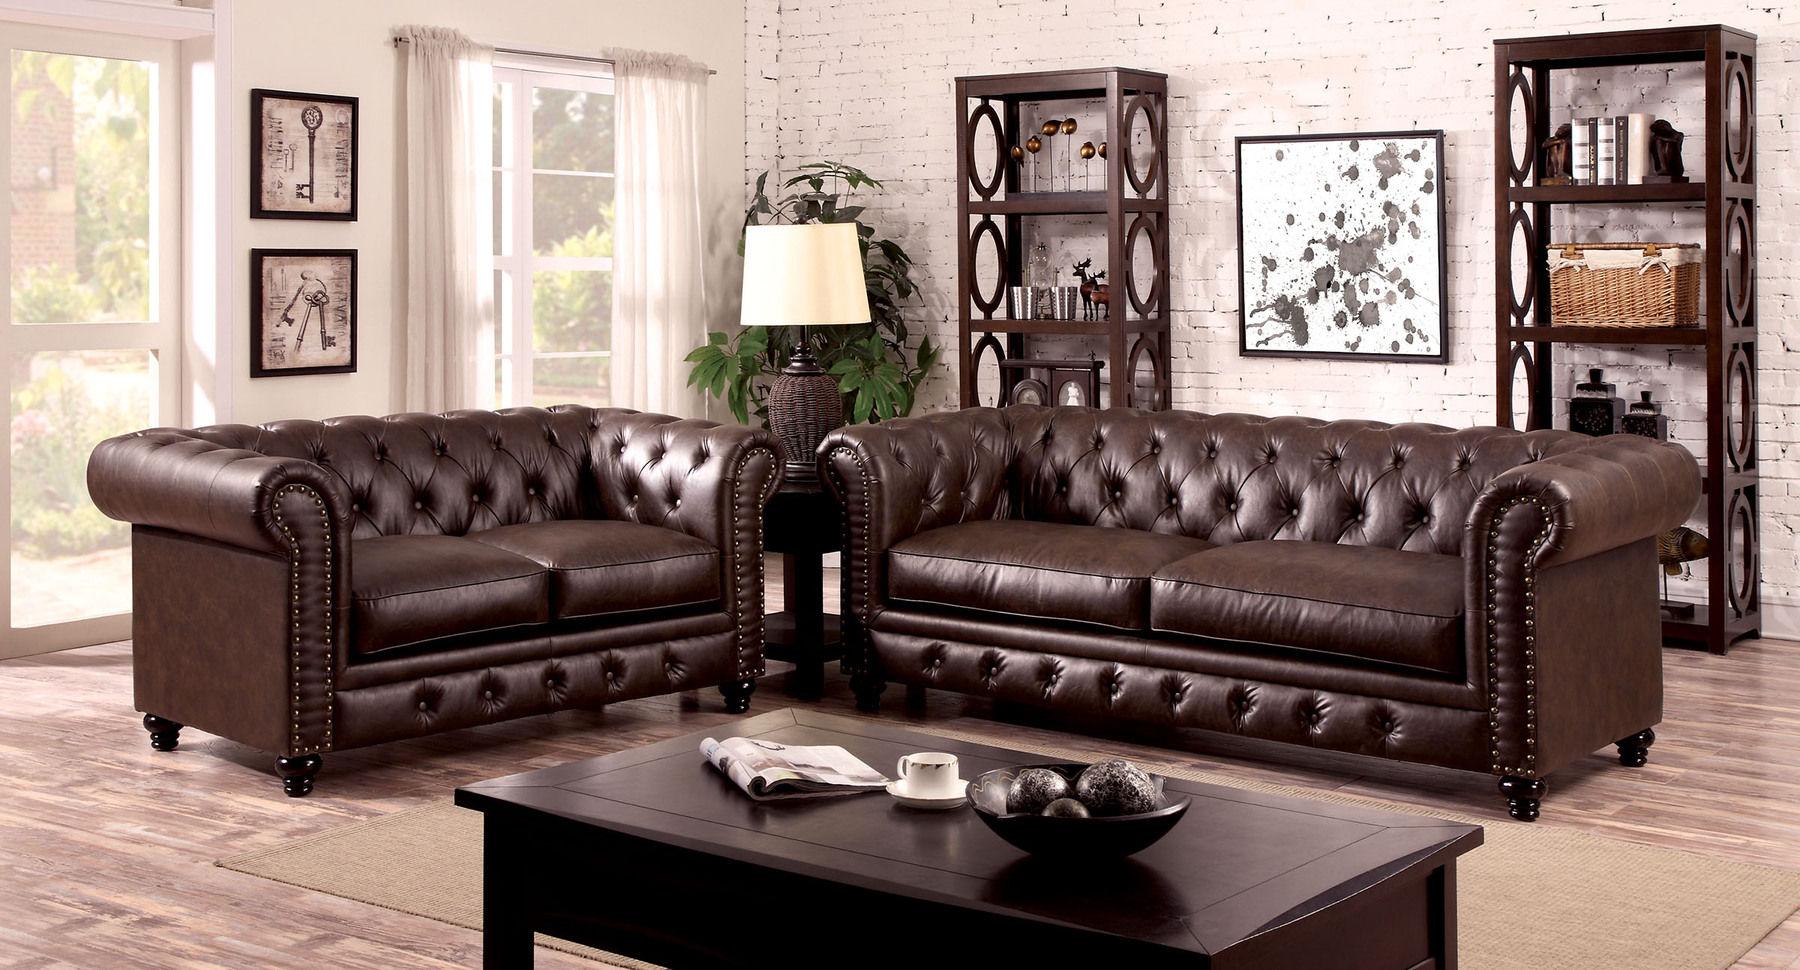 Transitional Sofa and Loveseat Set CM6269BR-2PC Stanford CM6269BR-2PC in Brown Leatherette